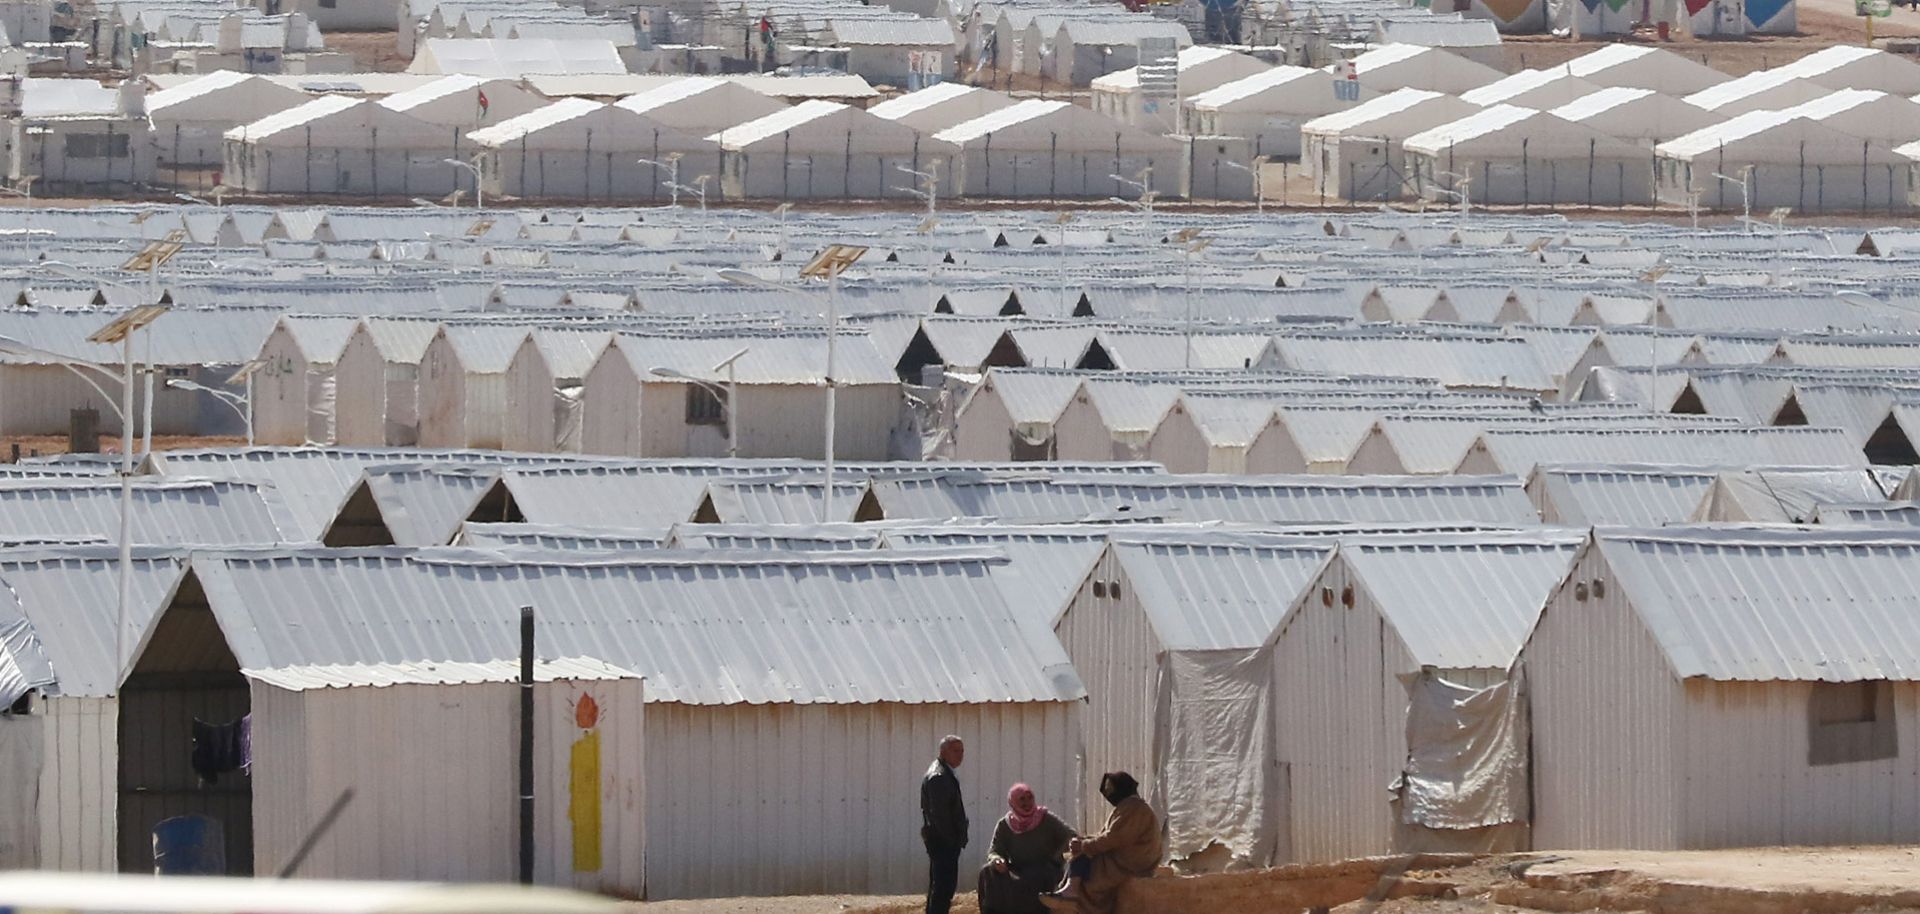 Prefabricated metal homes are seen at the Azraq camp for Syrian refugees in northern Jordan on January 30, 2016.